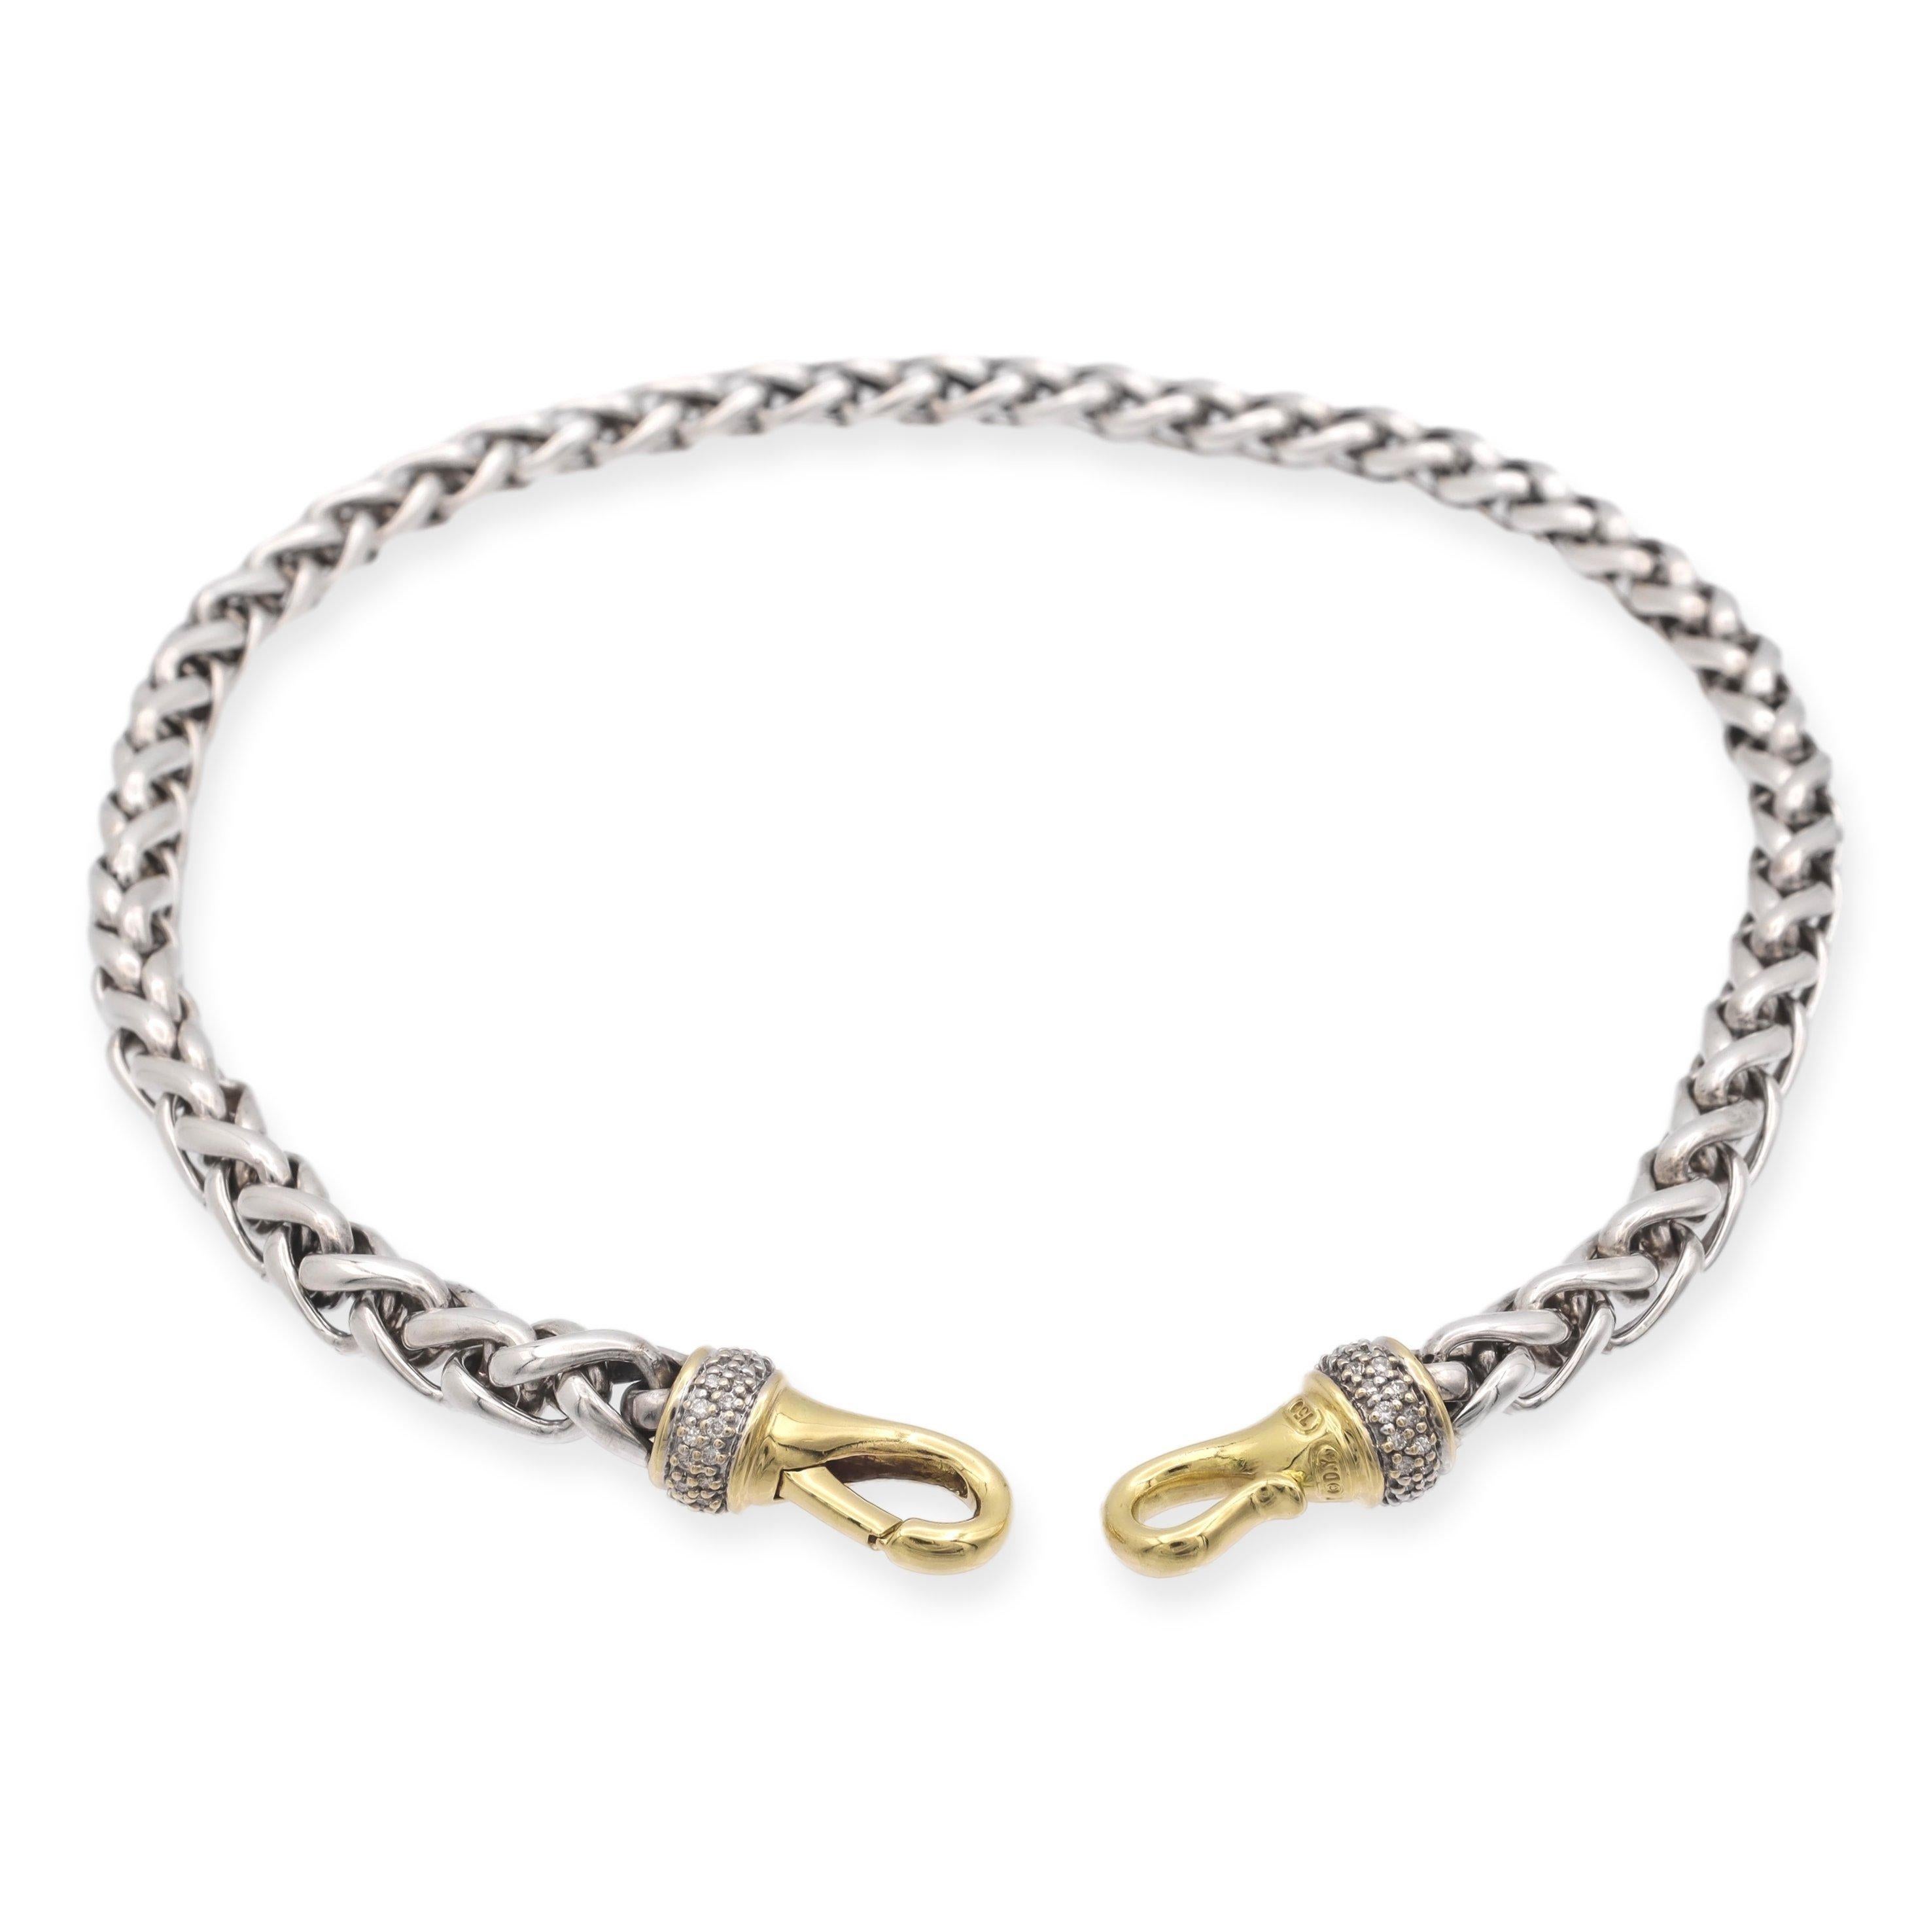 David Yurman wheat chain necklace finely crafted in sterling silver featuring with 68 round brilliant cut pave set diamonds on each end set in 18 karat yellow gold with large lobster push down closure. The necklace measures 8mm wide and 18 inches